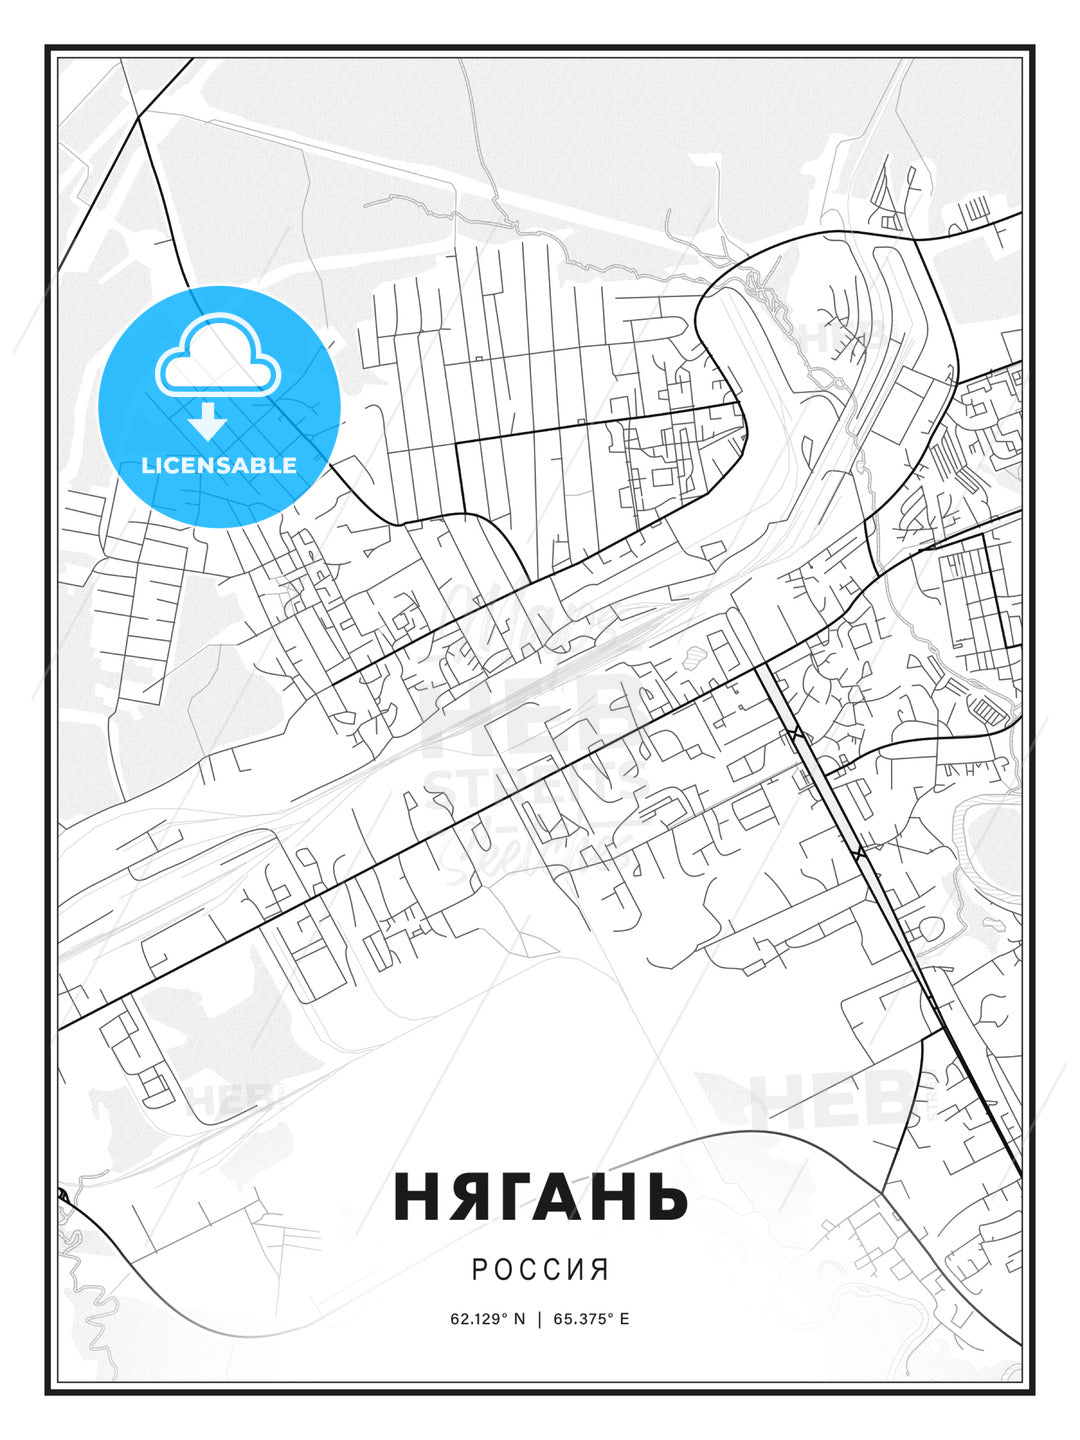 НЯГАНЬ / Nyagan, Russia, Modern Print Template in Various Formats - HEBSTREITS Sketches